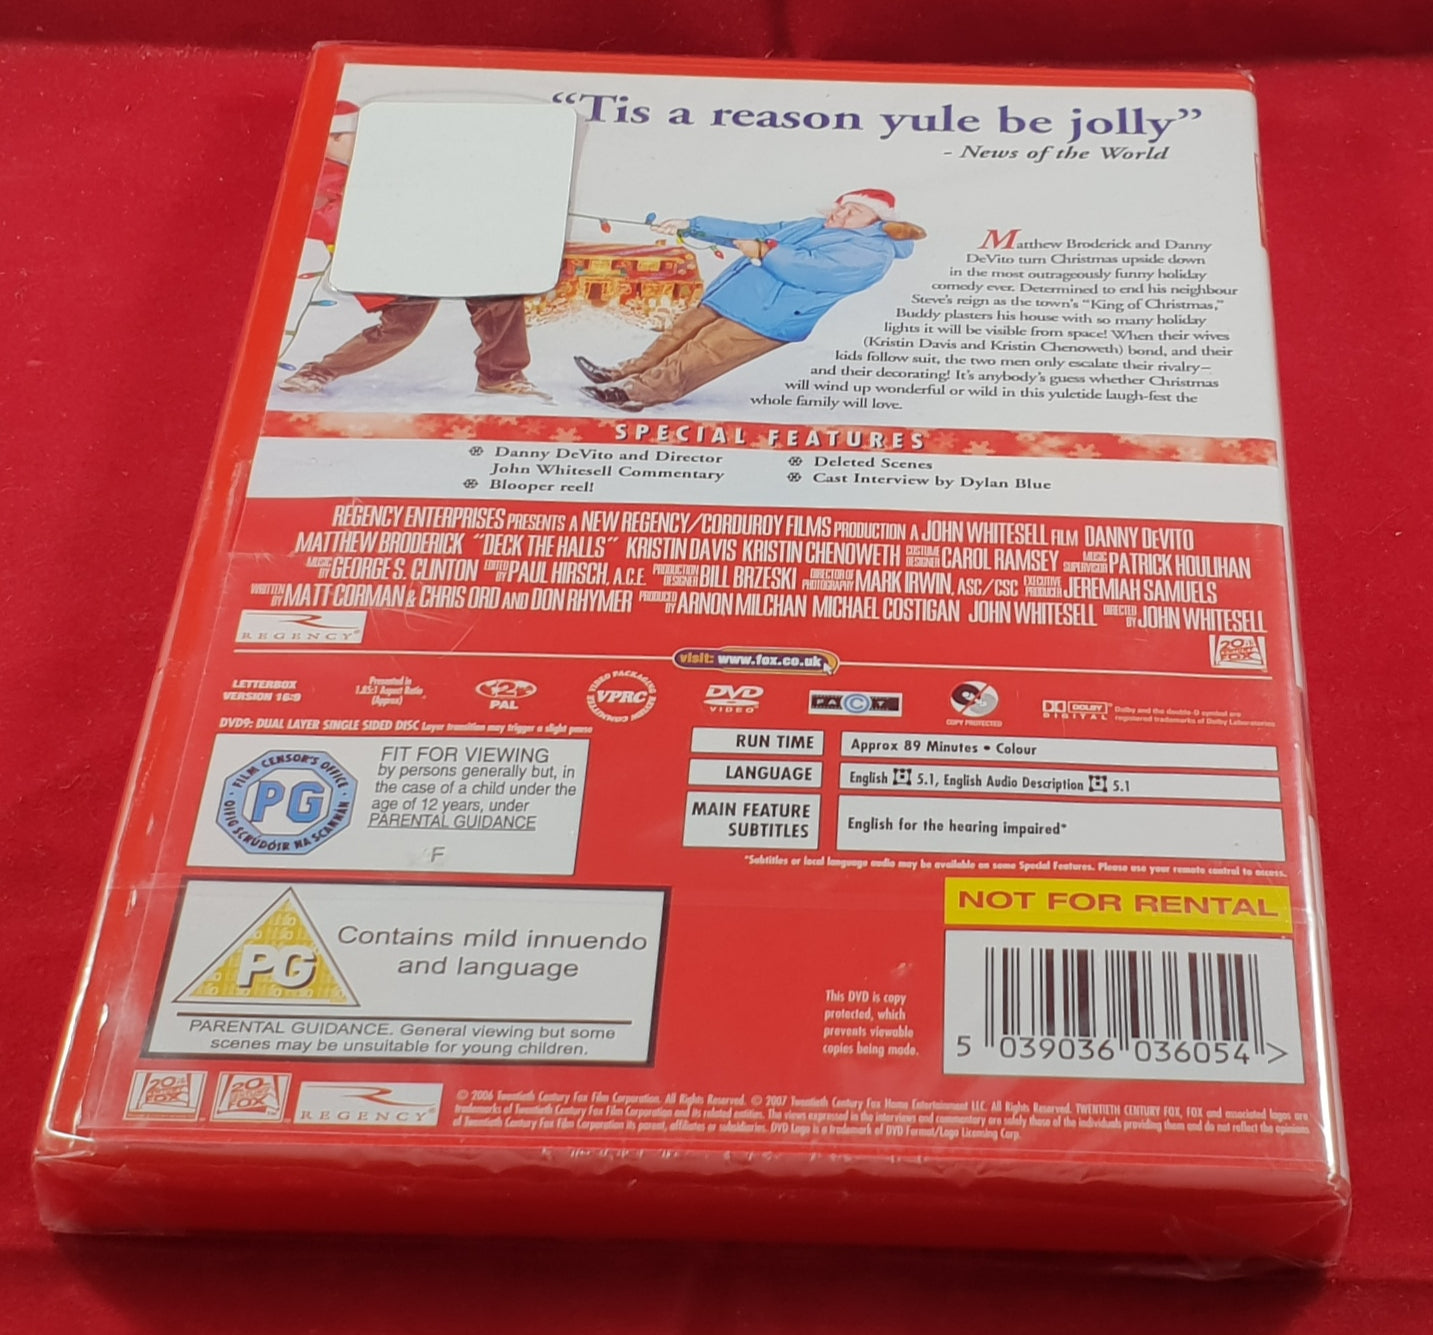 Brand New and Sealed Deck the Halls DVD